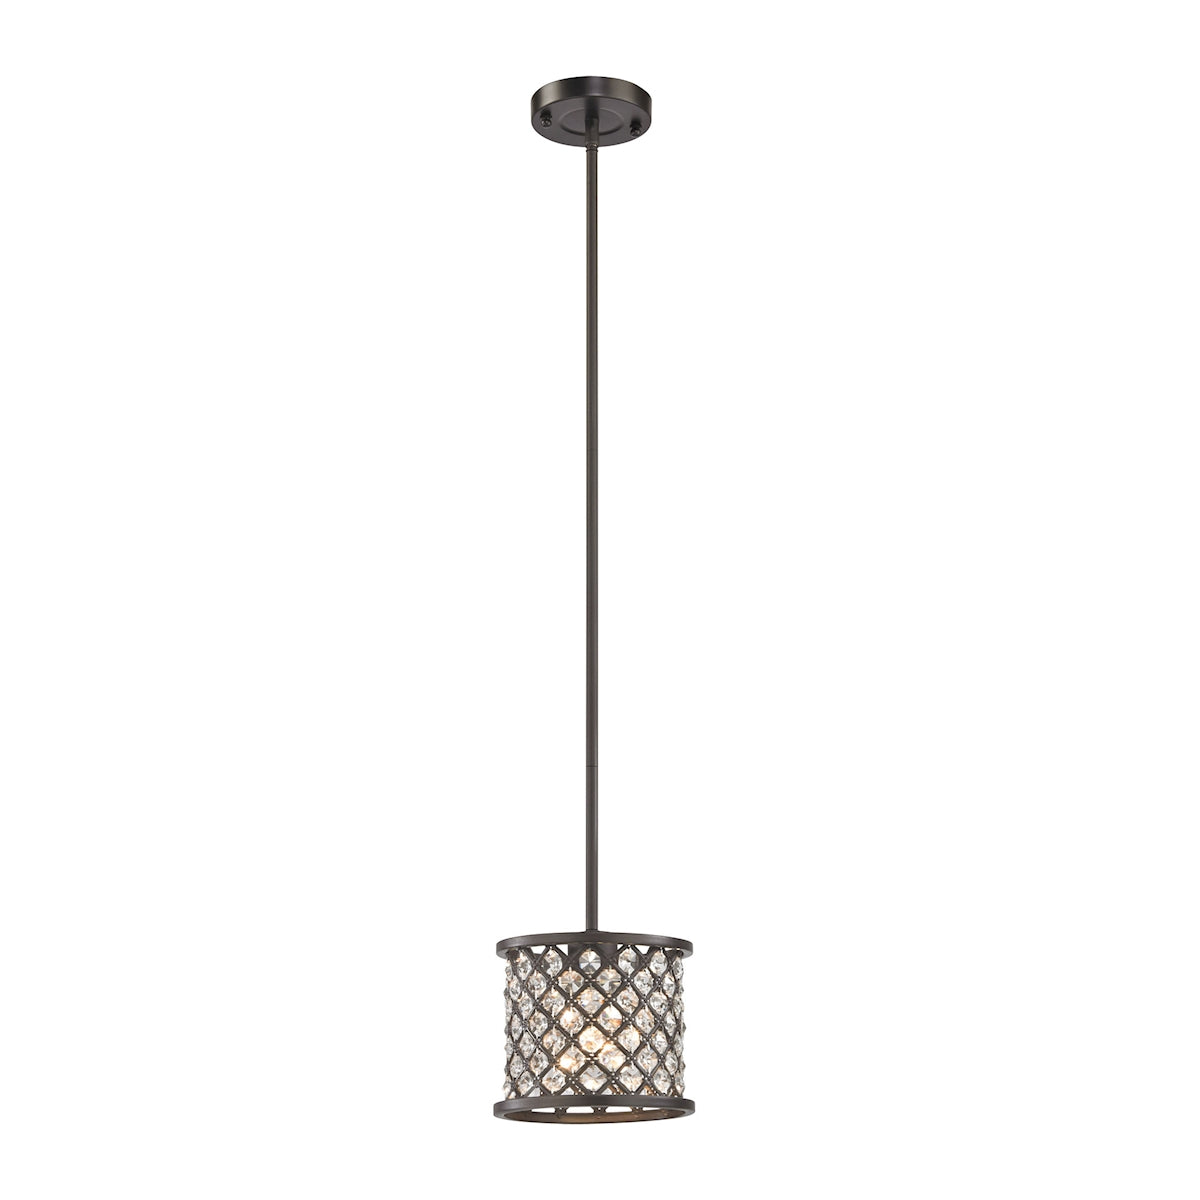 ELK Lighting 32102/1 Genevieve 1-Light Mini Pendant in Oil Rubbed Bronze with Crystal and Mesh Shade